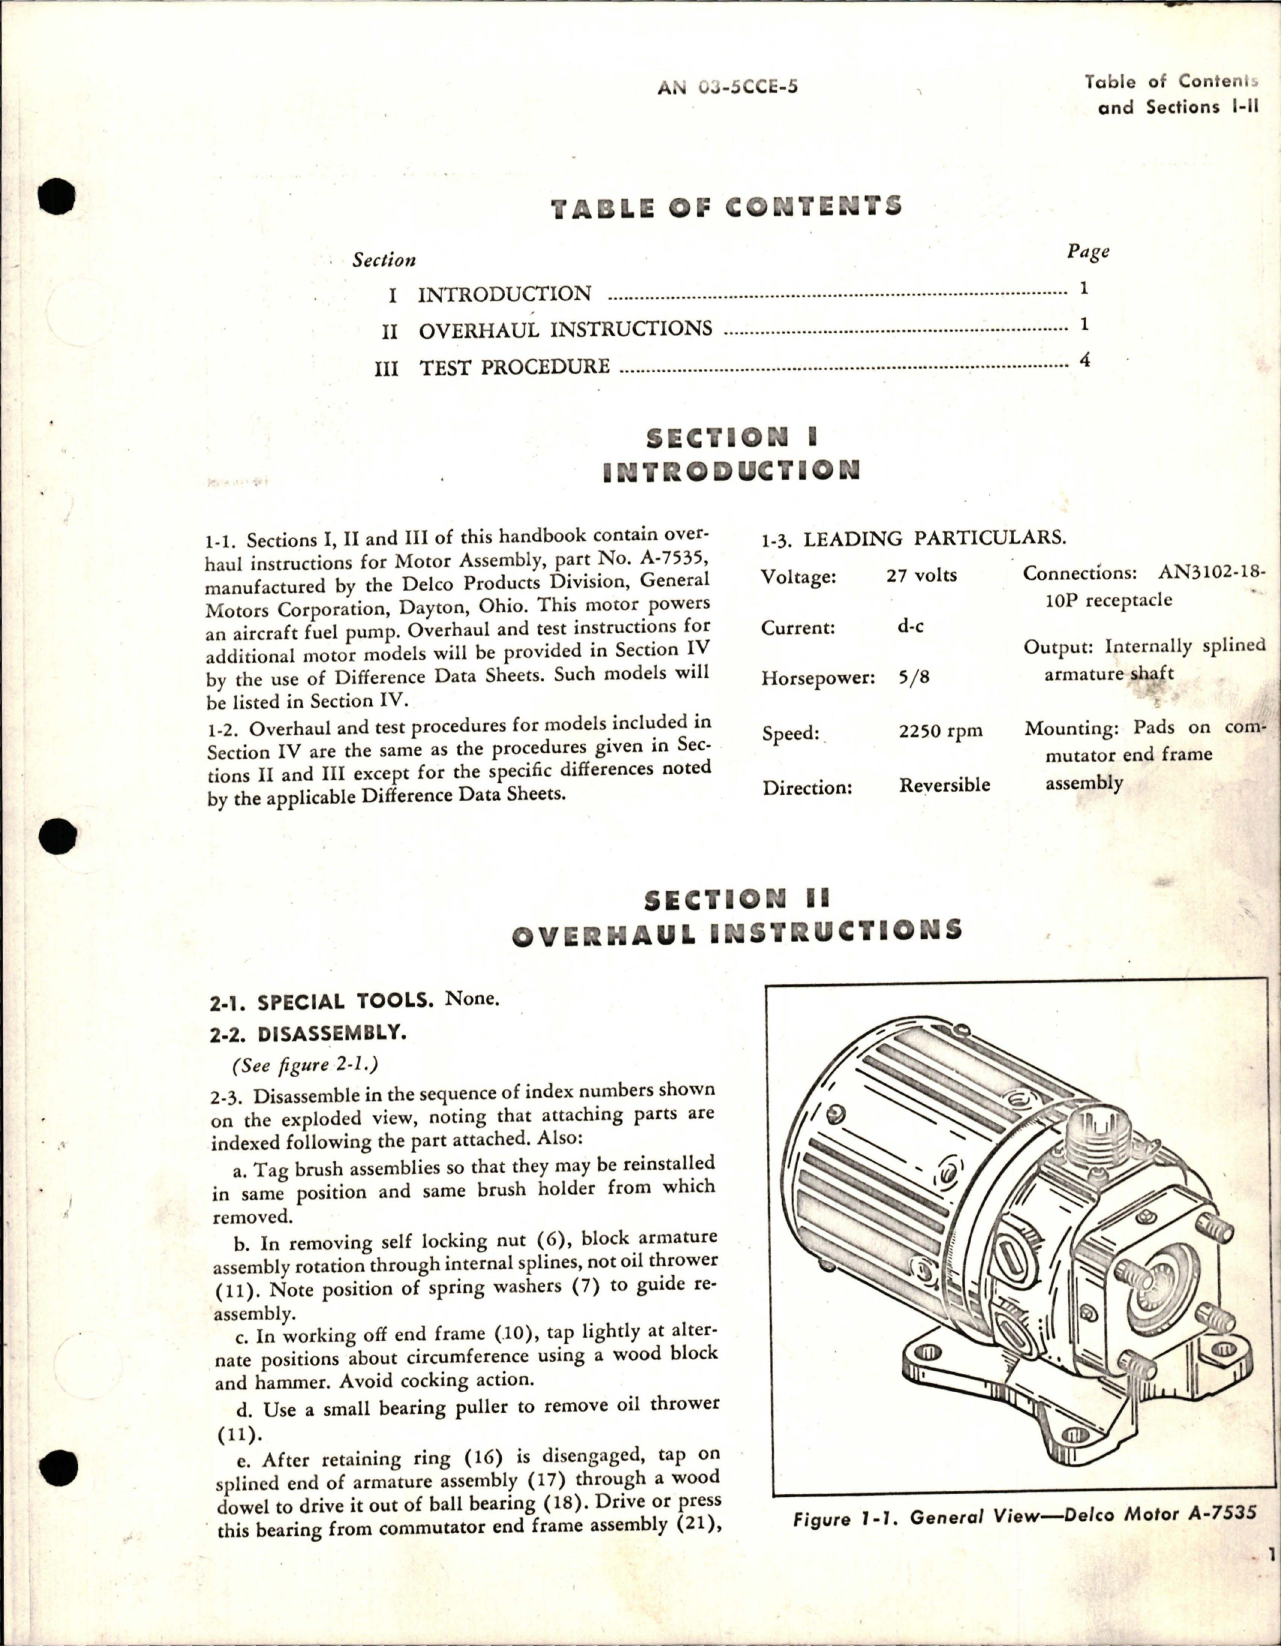 Sample page 5 from AirCorps Library document: Overhaul Instructions for Motor Assembly - Model A-7535 